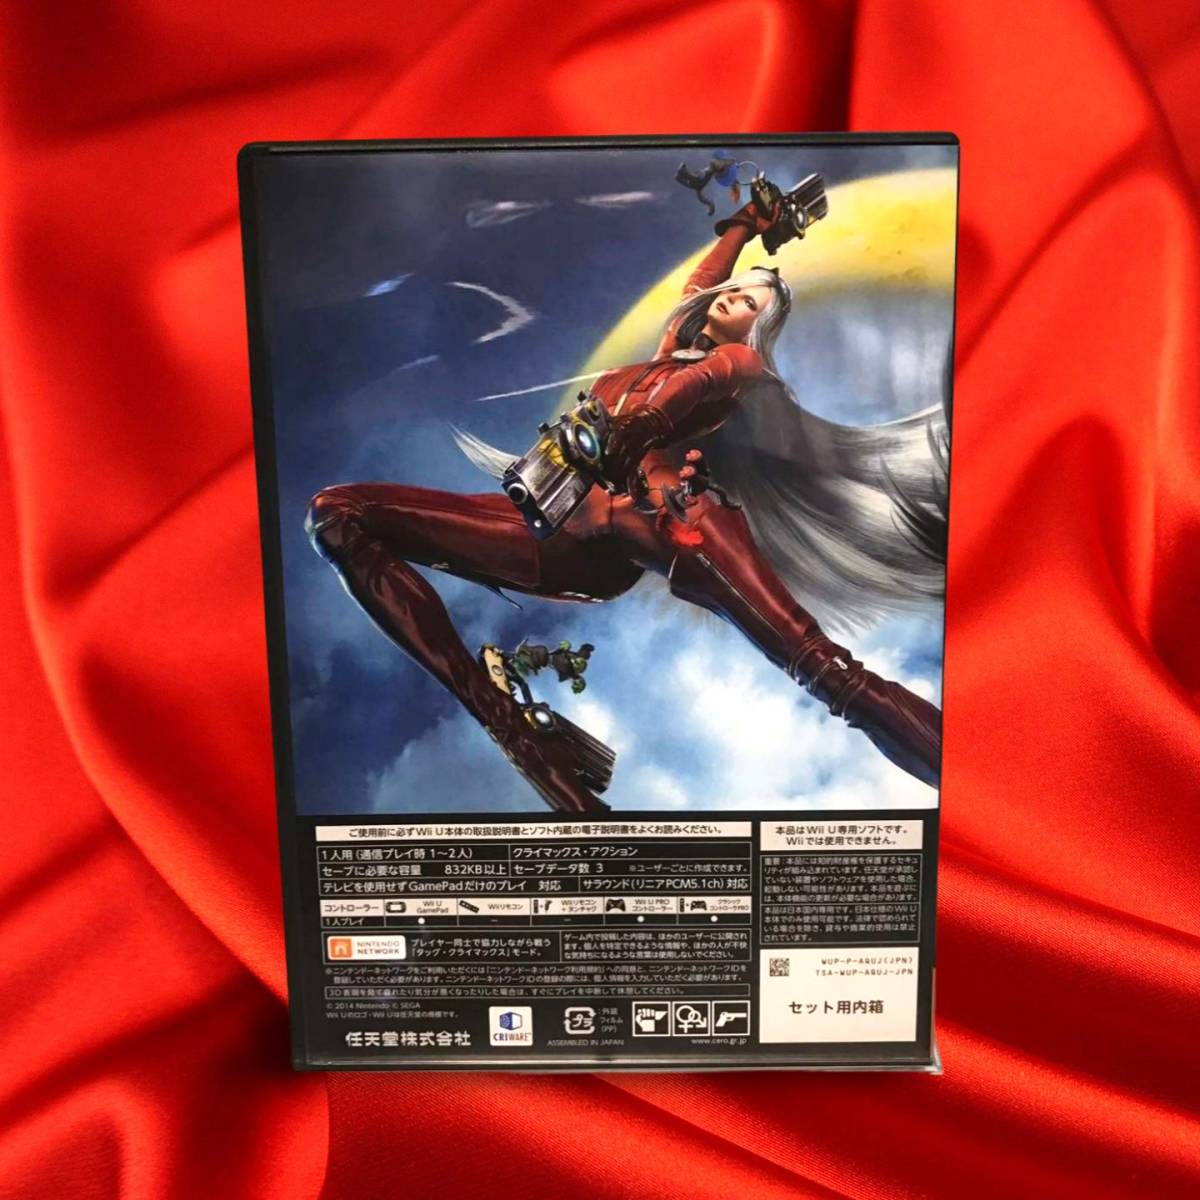 Wii U version Bayonetta 2 (Wii U version [ Bayonetta ]. game disk including in a package )